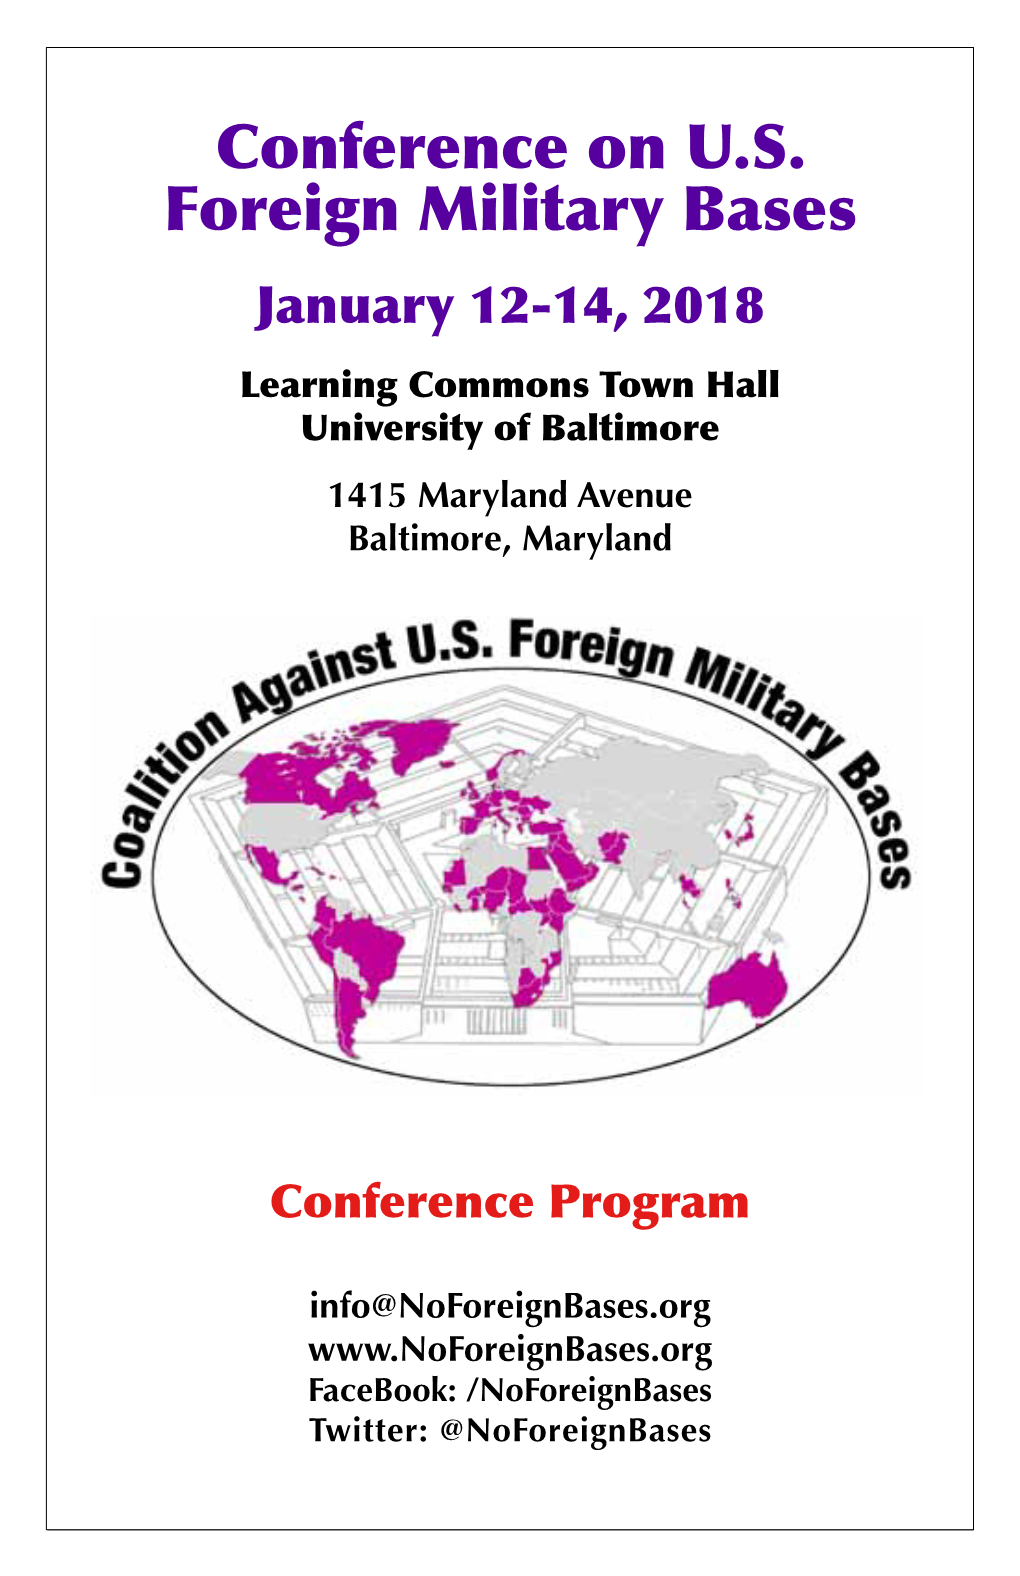 Conference on U.S. Foreign Military Bases January 12-14, 2018 Learning Commons Town Hall University of Baltimore 1415 Maryland Avenue Baltimore, Maryland